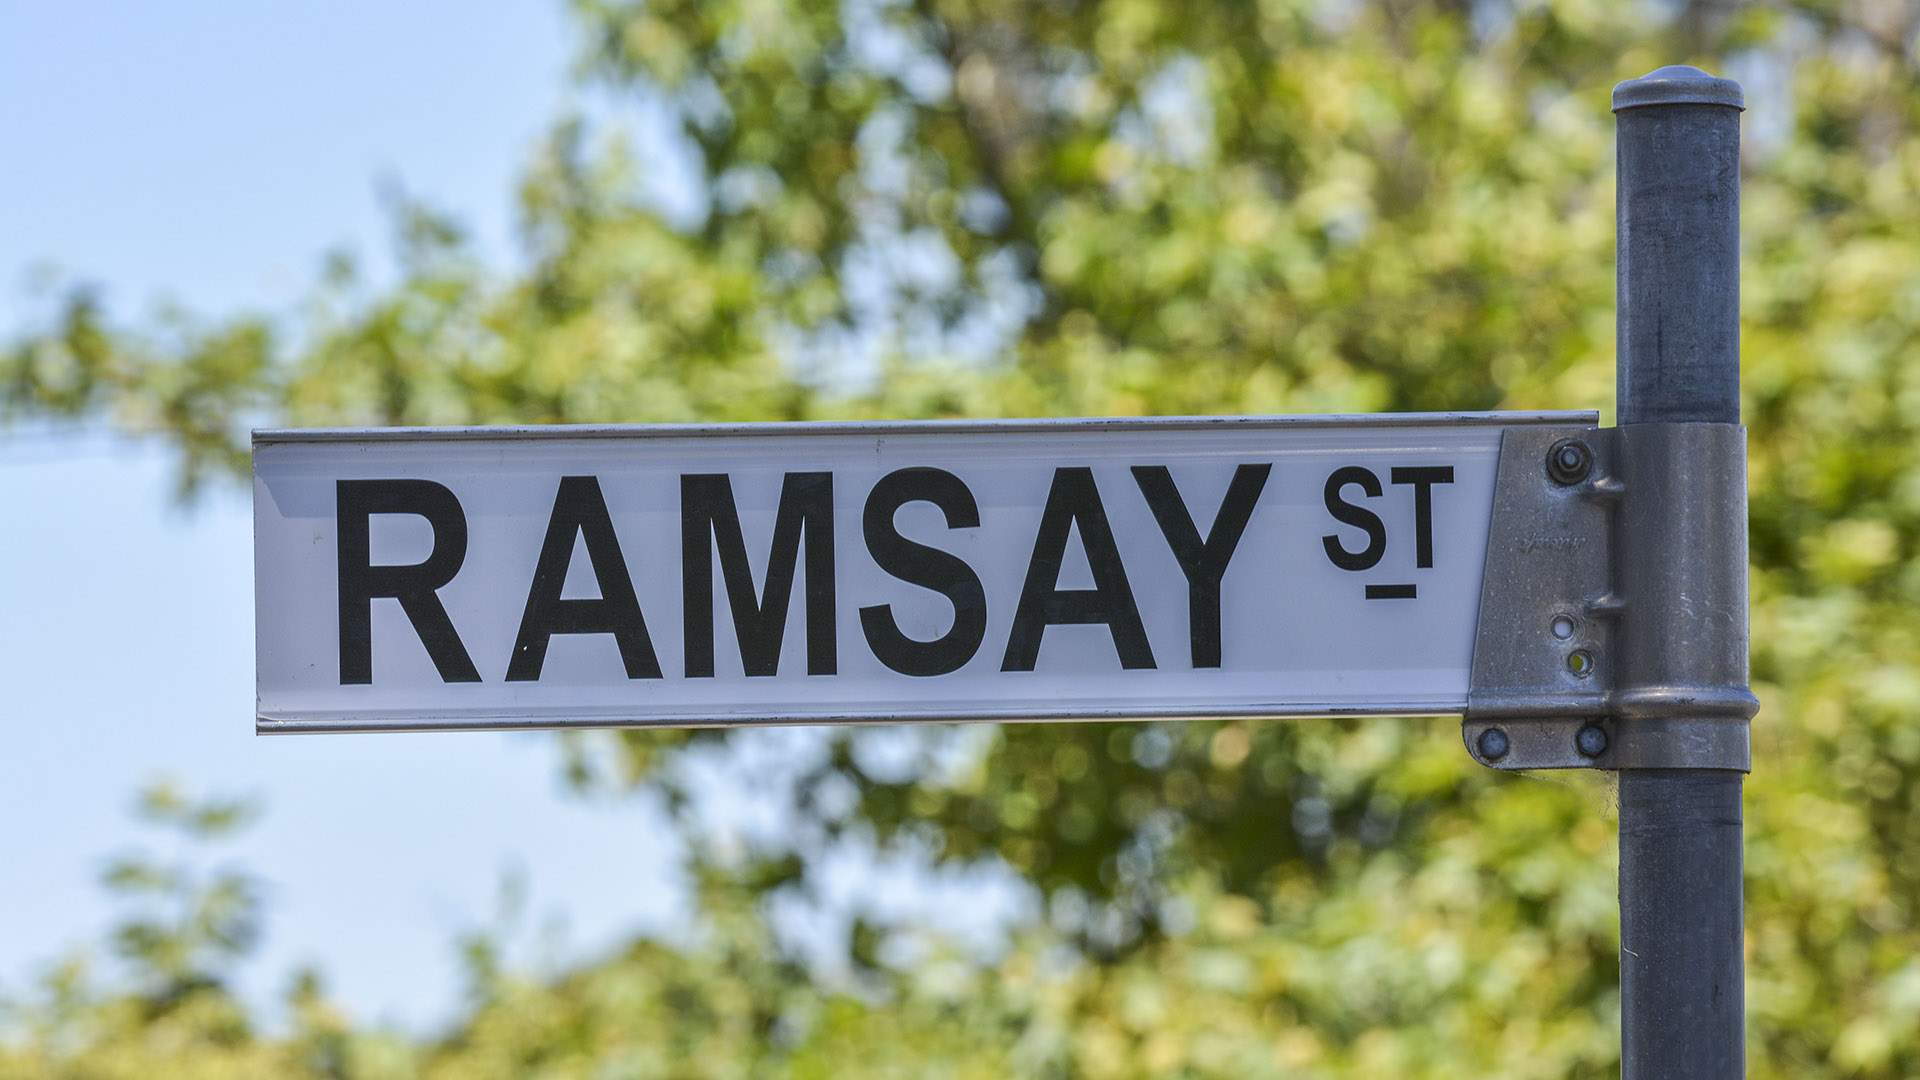 It's the End of the Ramsay Street Era: 'Neighbours' Has Been Cancelled After 37 Years